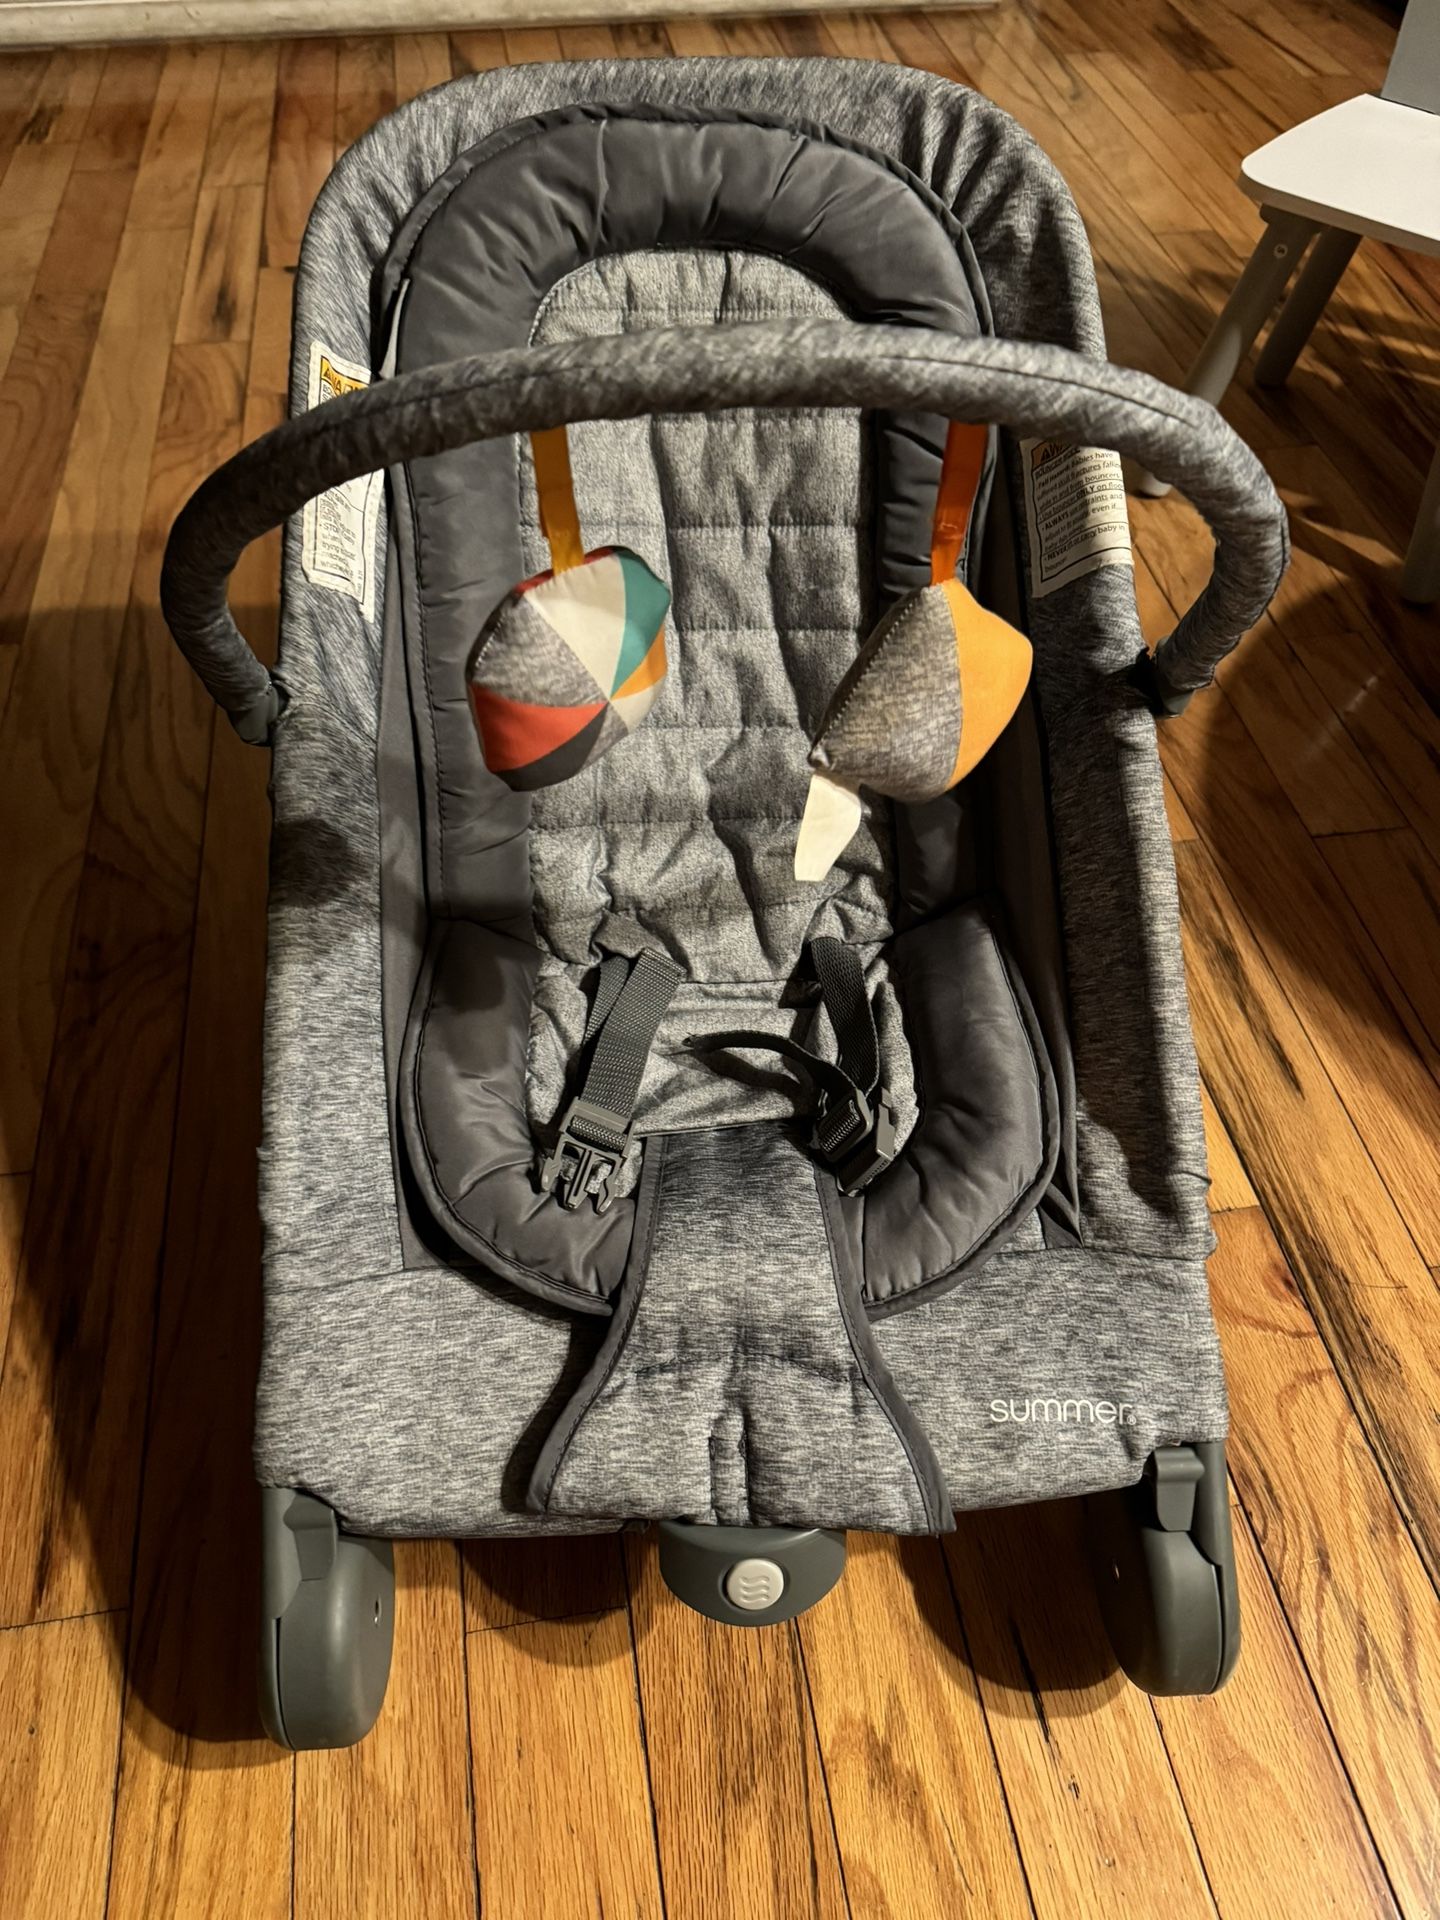 Ingenuity Summer Baby Bouncer Chair